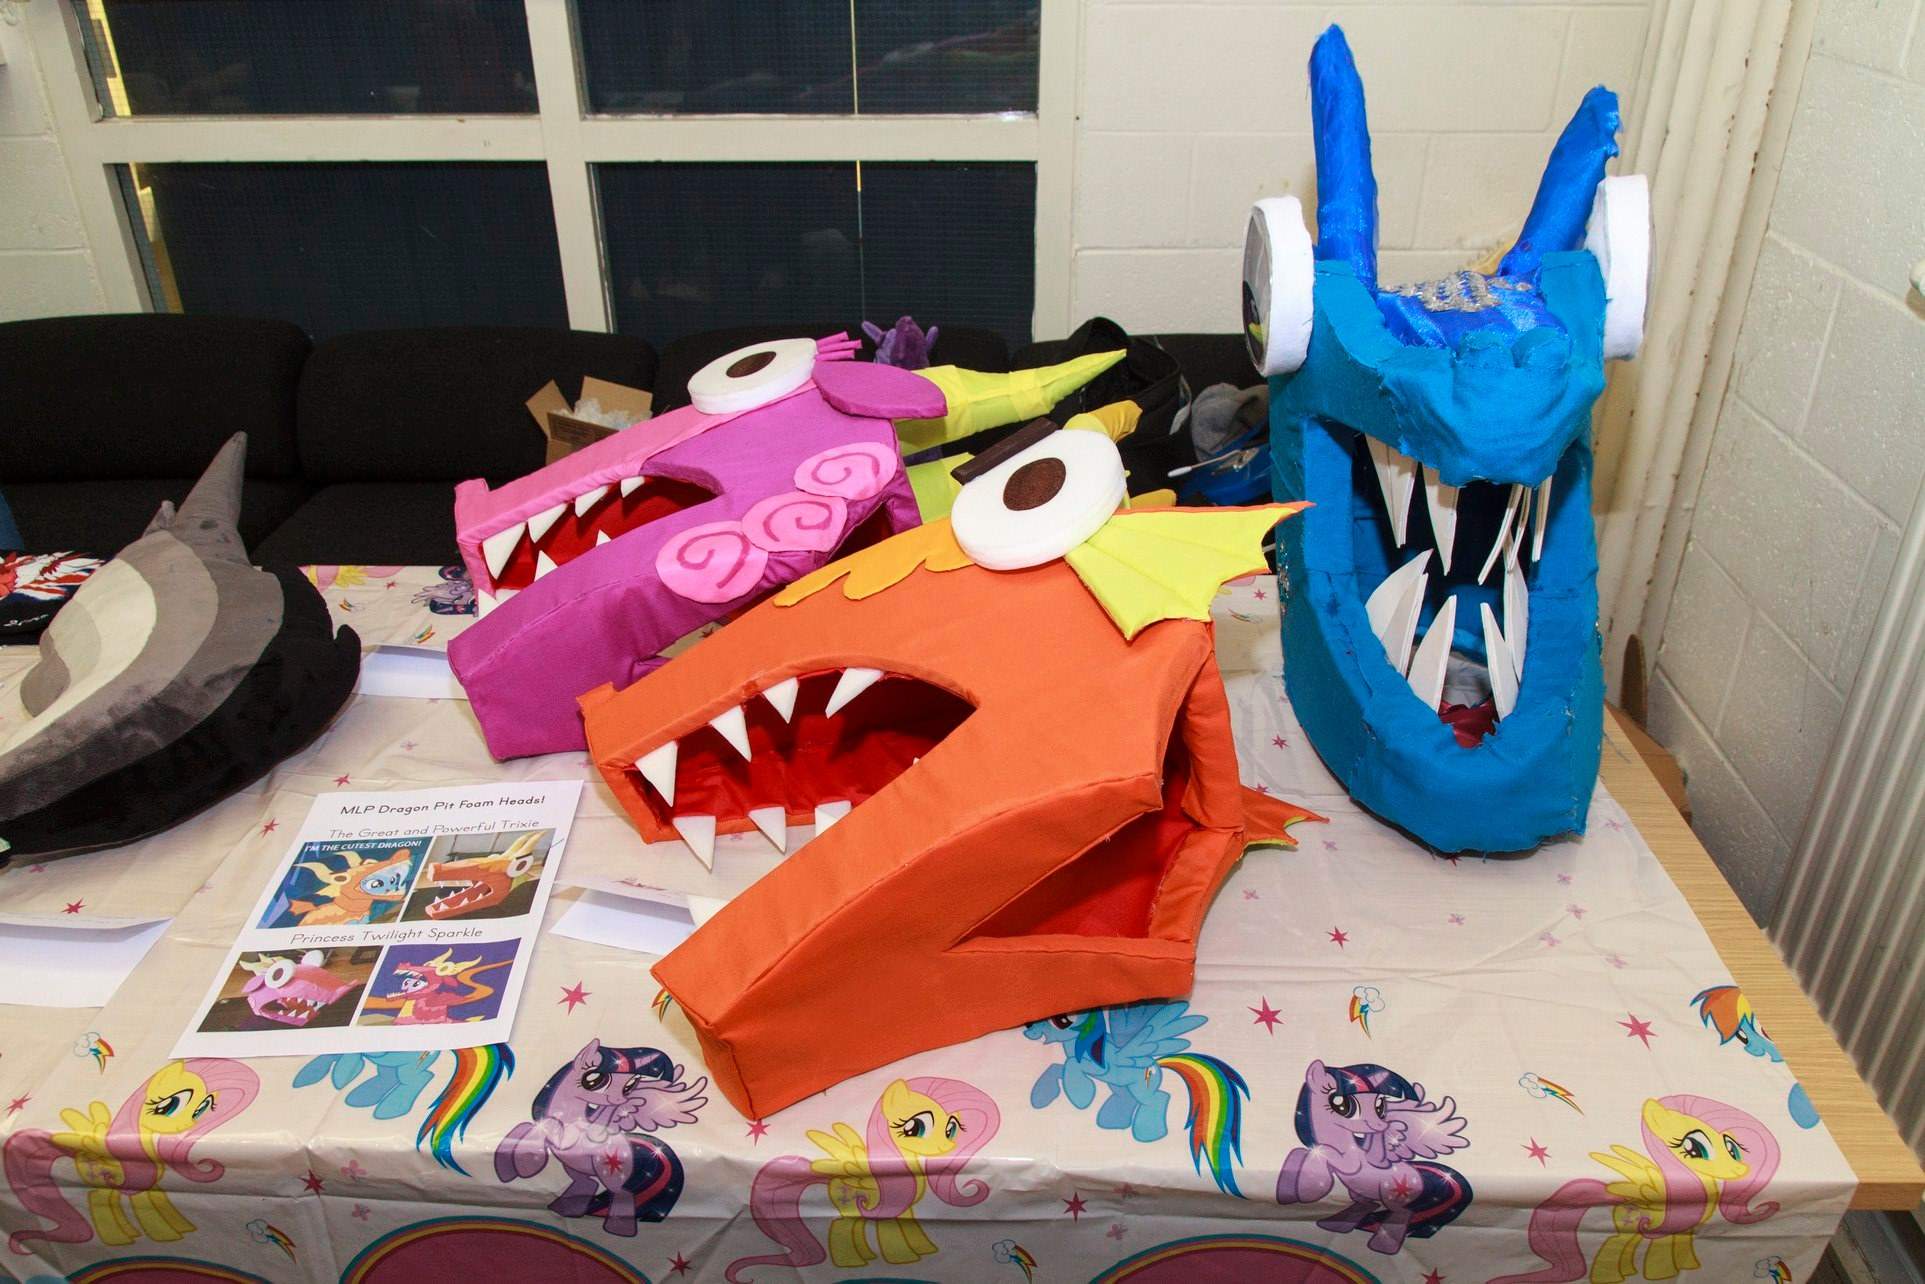 Scary Dragon Heads! (from Ogres and Oubliettes)